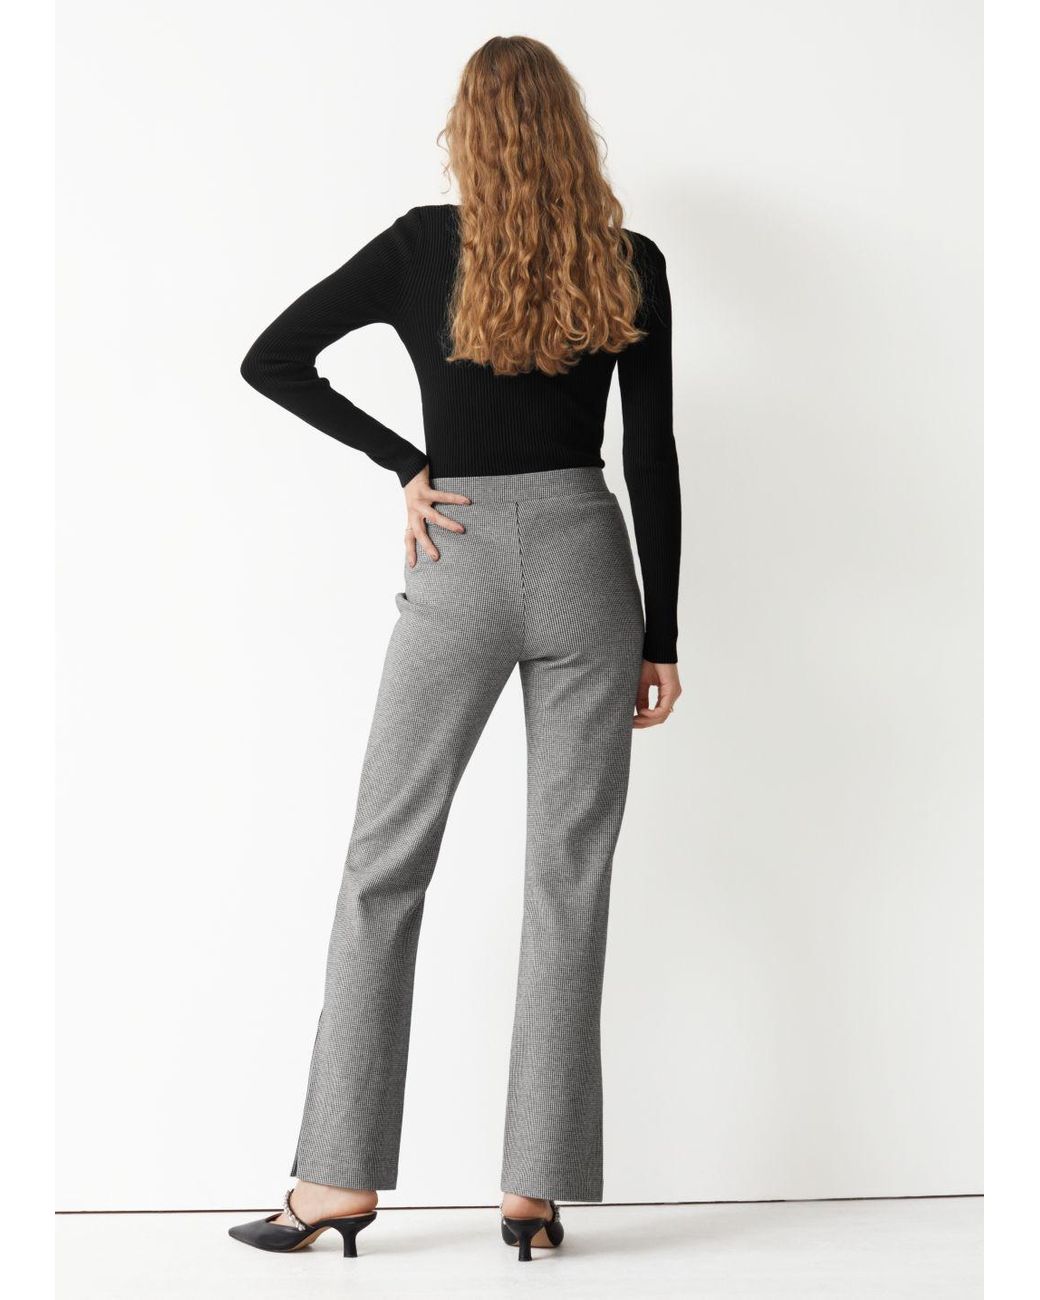 & Other Stories Fitted Side Slit Trousers in Black | Lyst Canada